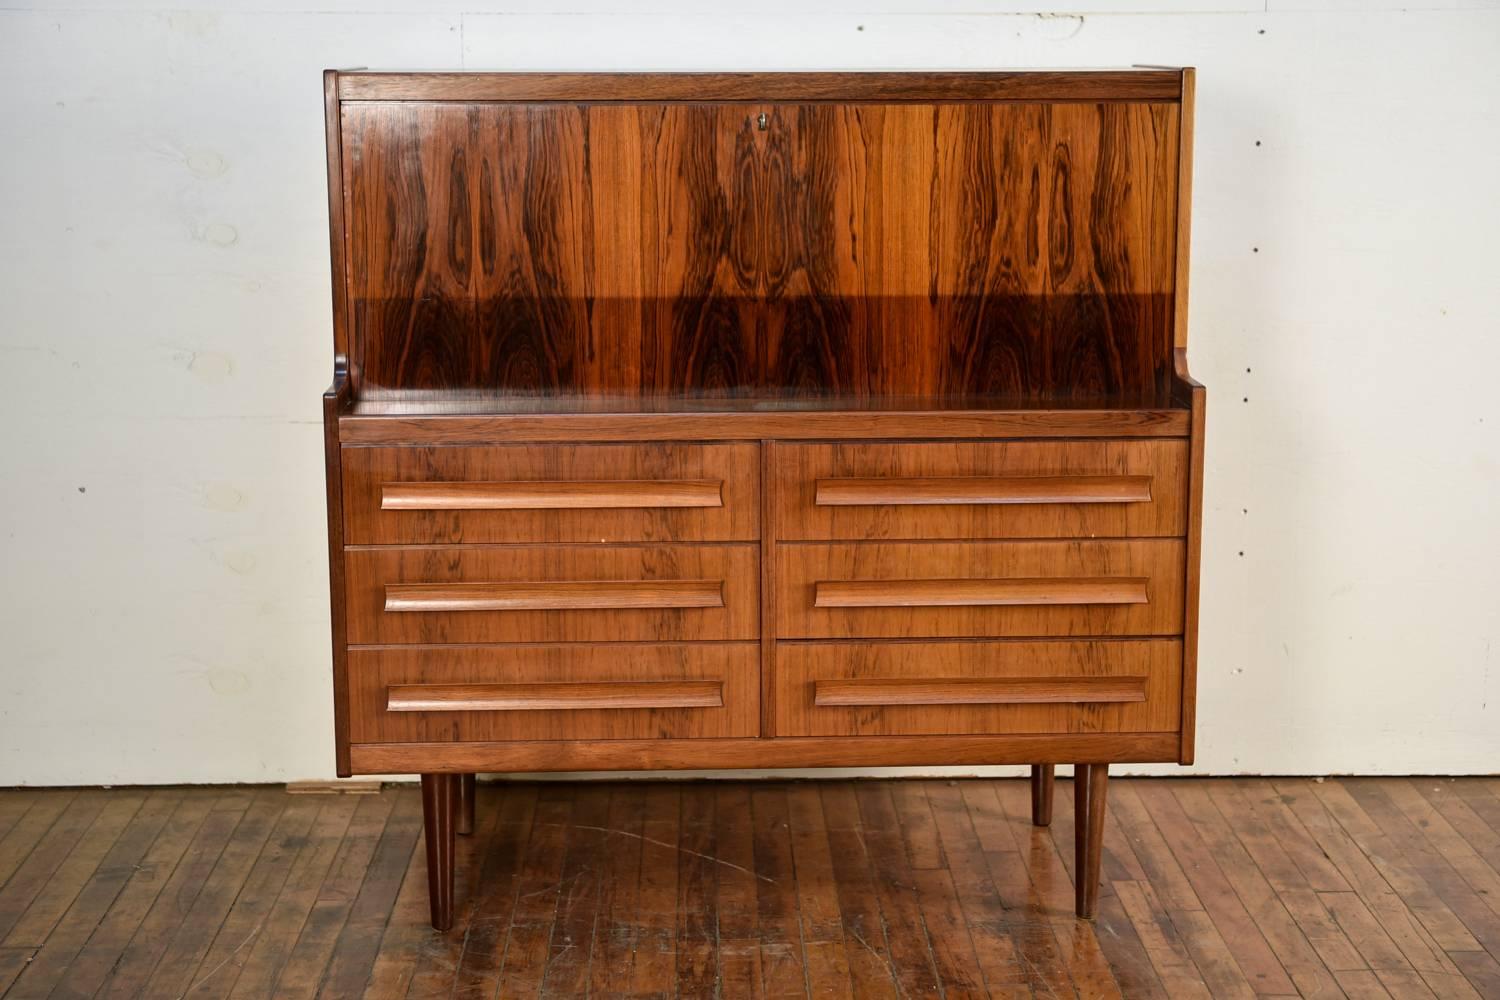 This stunning secretary or secretaire was manufactured by Ørum Møbelfabrik, circa 1950s. Absolutely gorgeous rosewood with a fantastic color and grain. Great drawers for storage purposes with stylish handles. Top portions opens up to reveal more